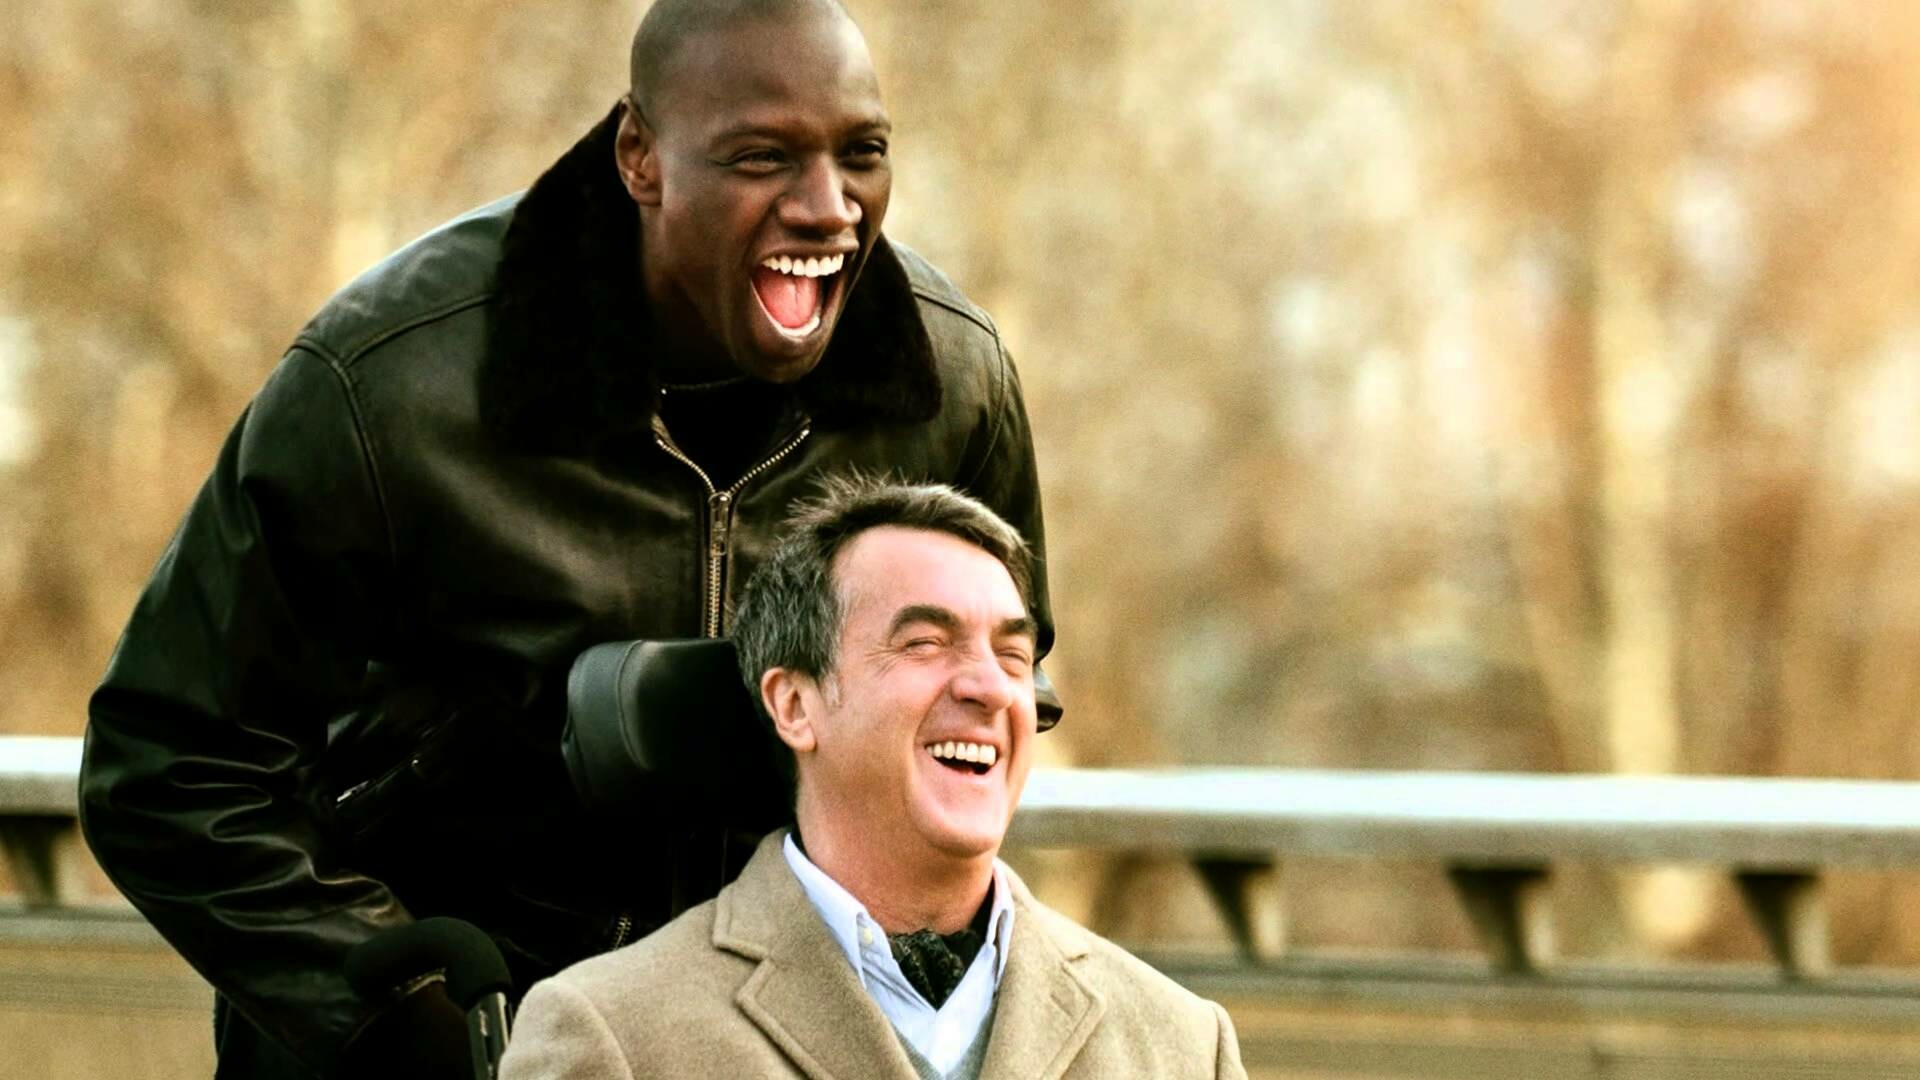 Intouchables: The film received eight nominations at the Cesar Awards 2012. 1920x1080 Full HD Wallpaper.